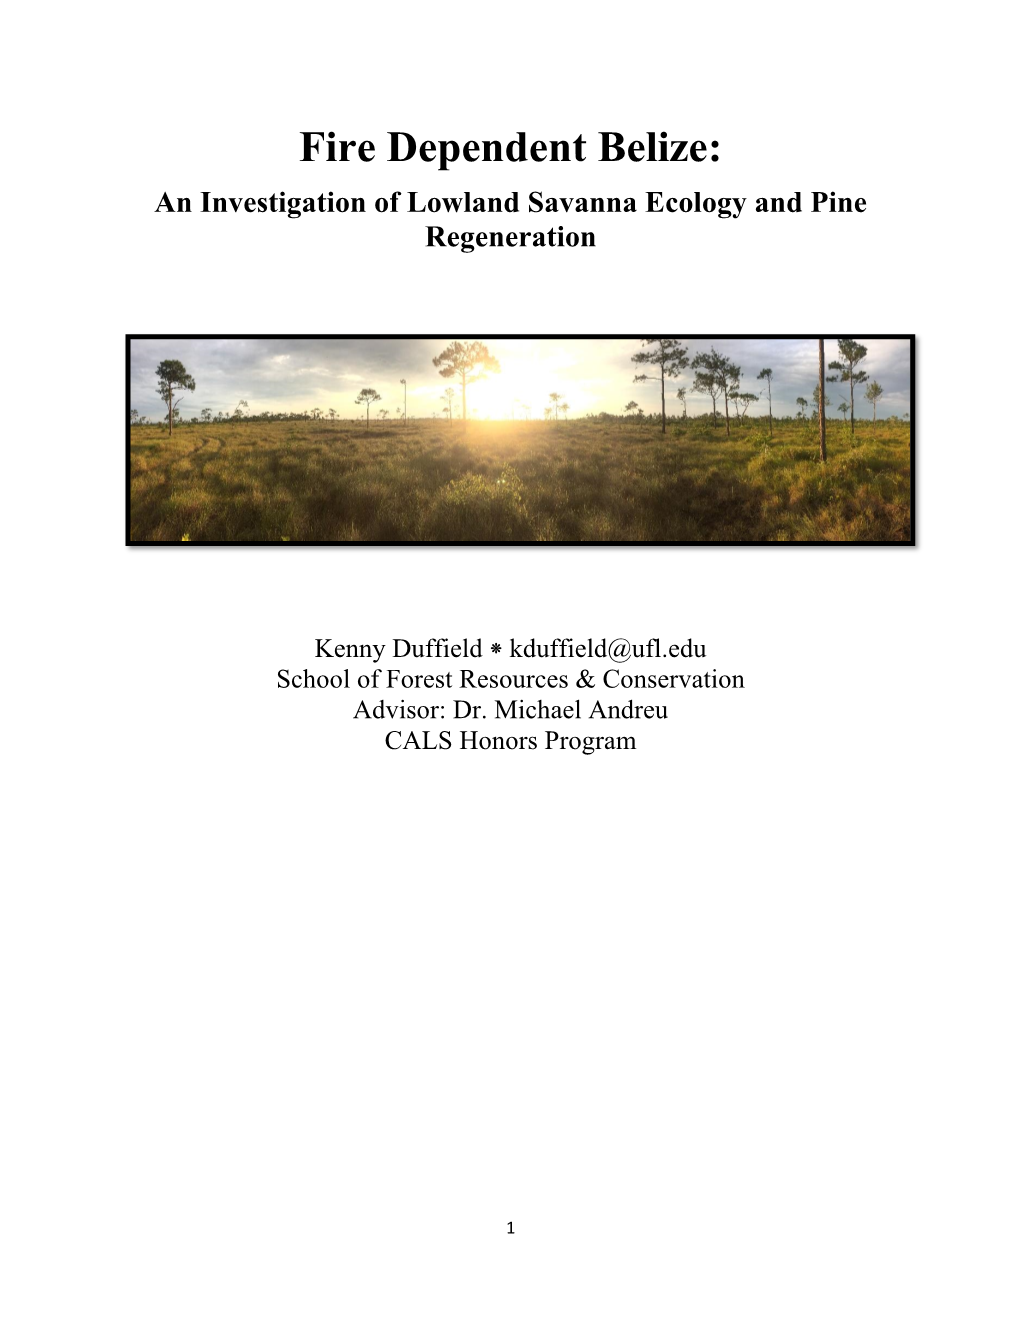 Fire Dependent Belize: an Investigation of Lowland Savanna Ecology and Pine Regeneration